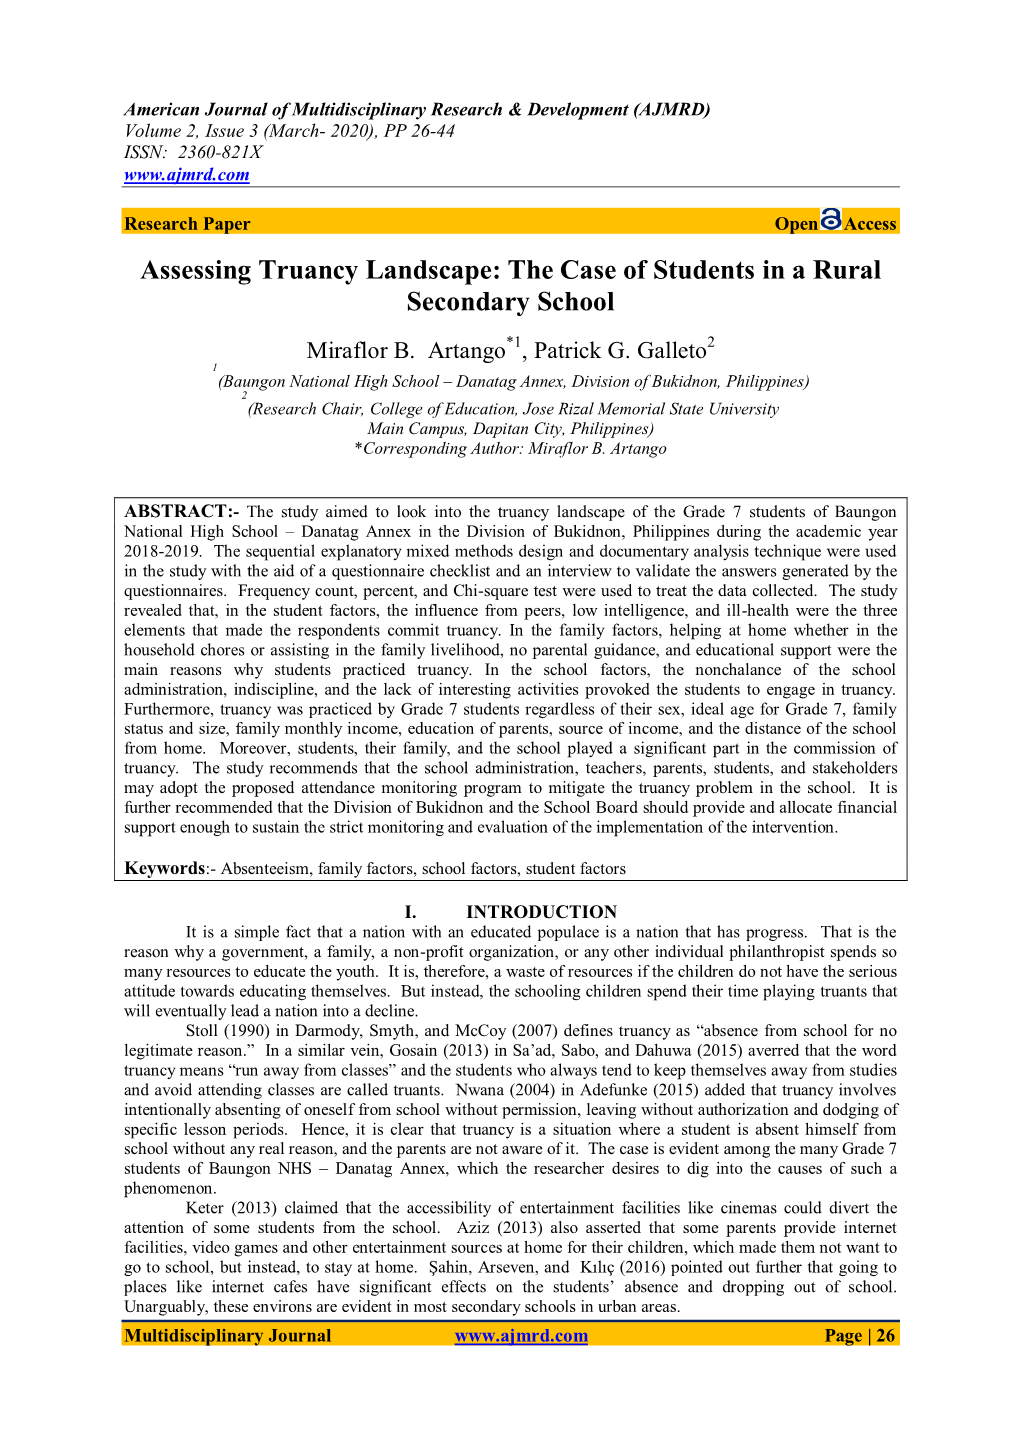 Assessing Truancy Landscape: the Case of Students in a Rural Secondary School